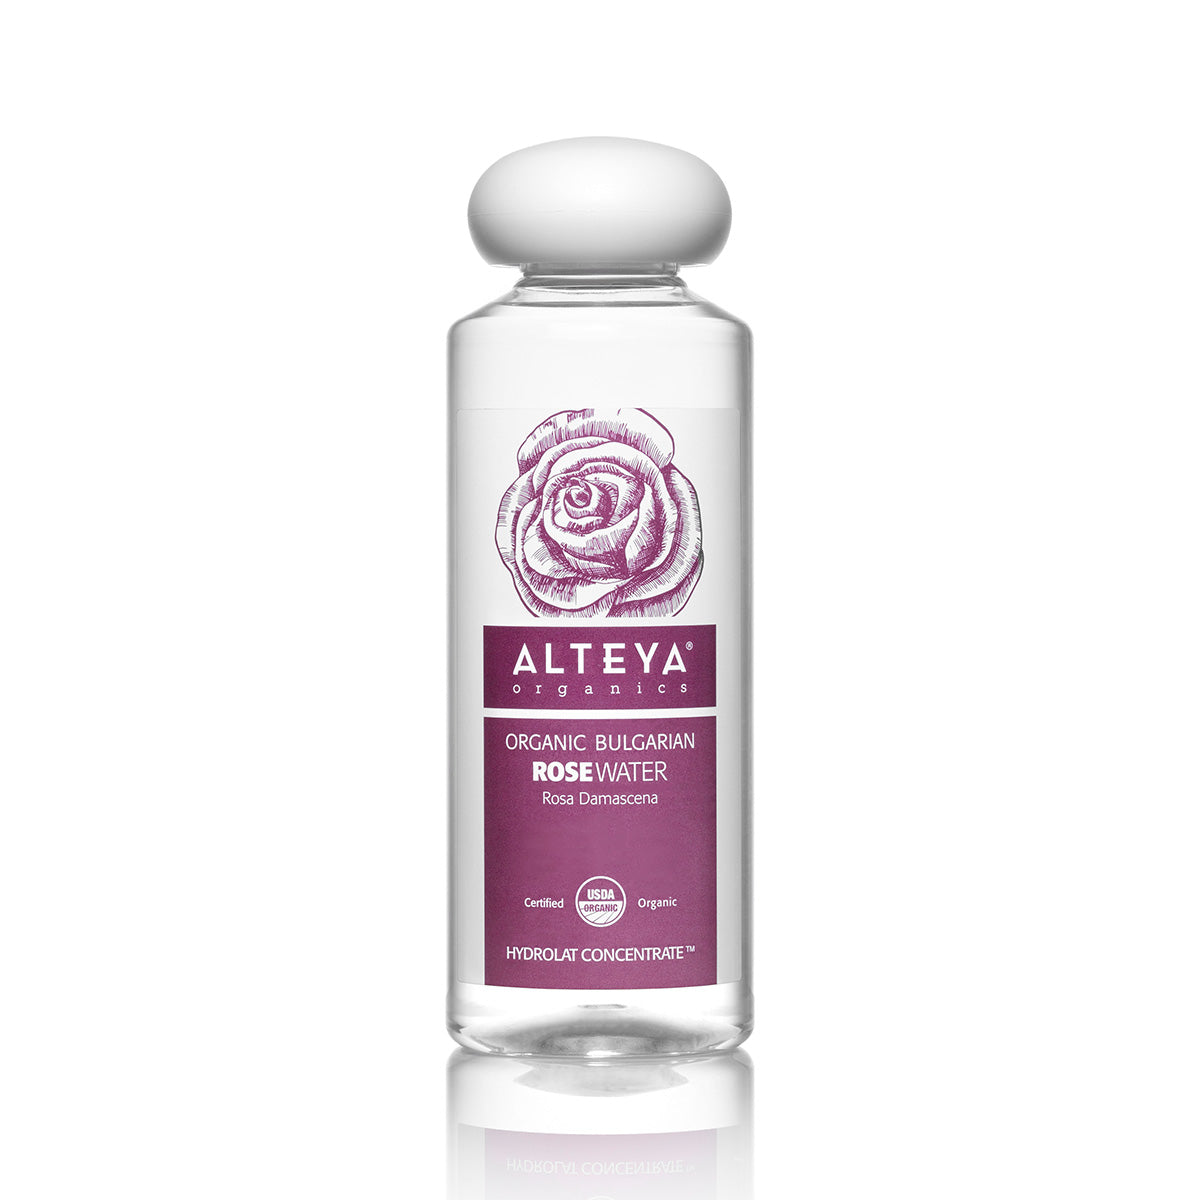 Rose Water helps tone, soften, and soothe skin, restoring its beauty and naturally fresh, youthful appearance.